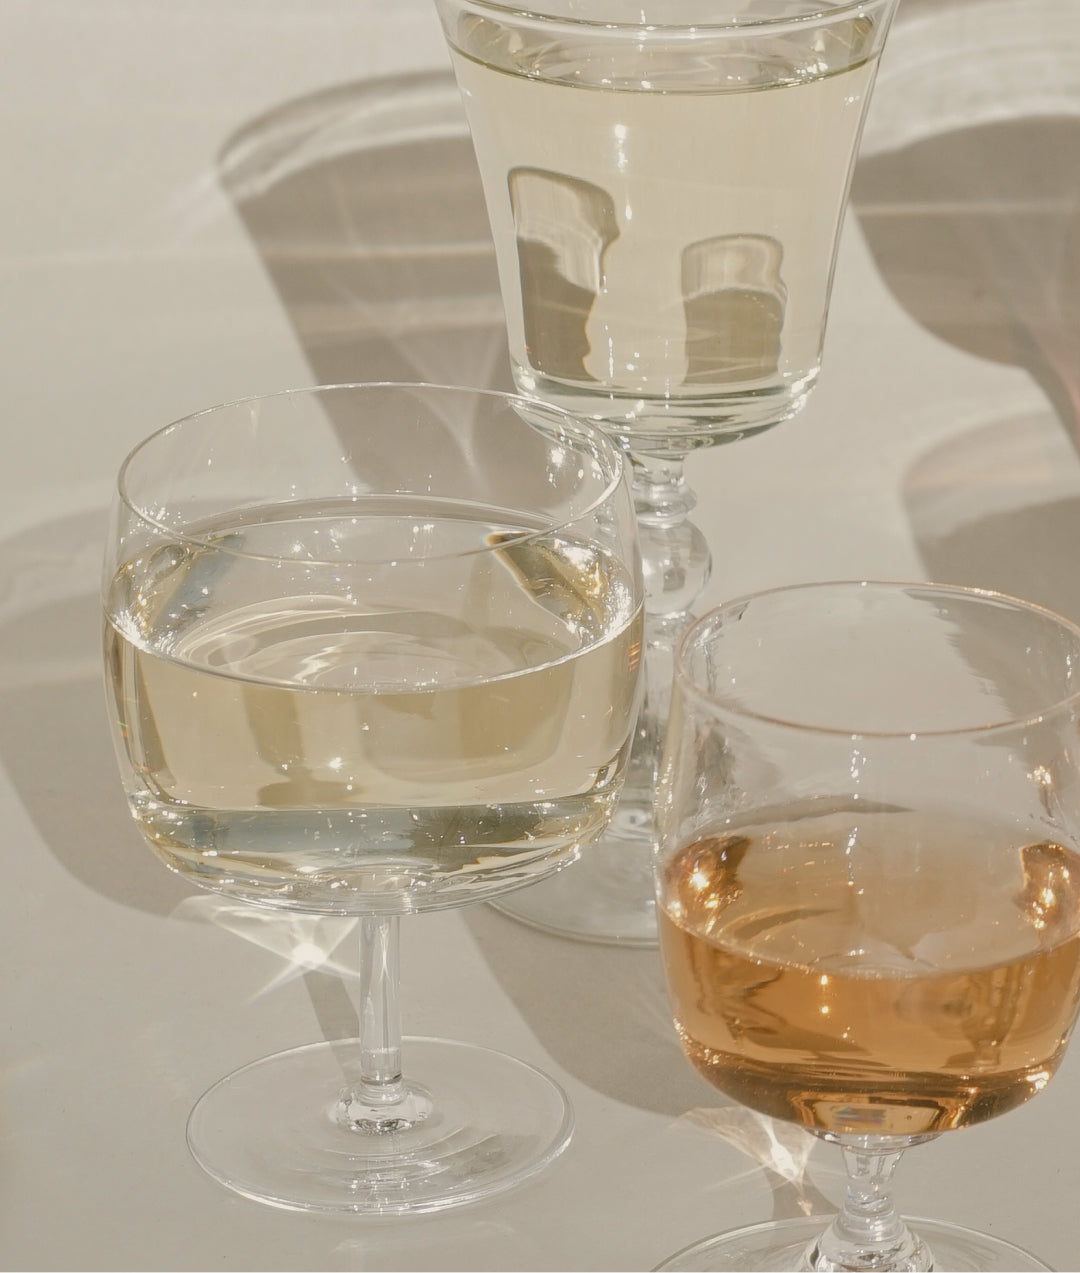 A closeup image of three wine glasses filled with Avaline White, Rosé, and Sparkling on a white table.